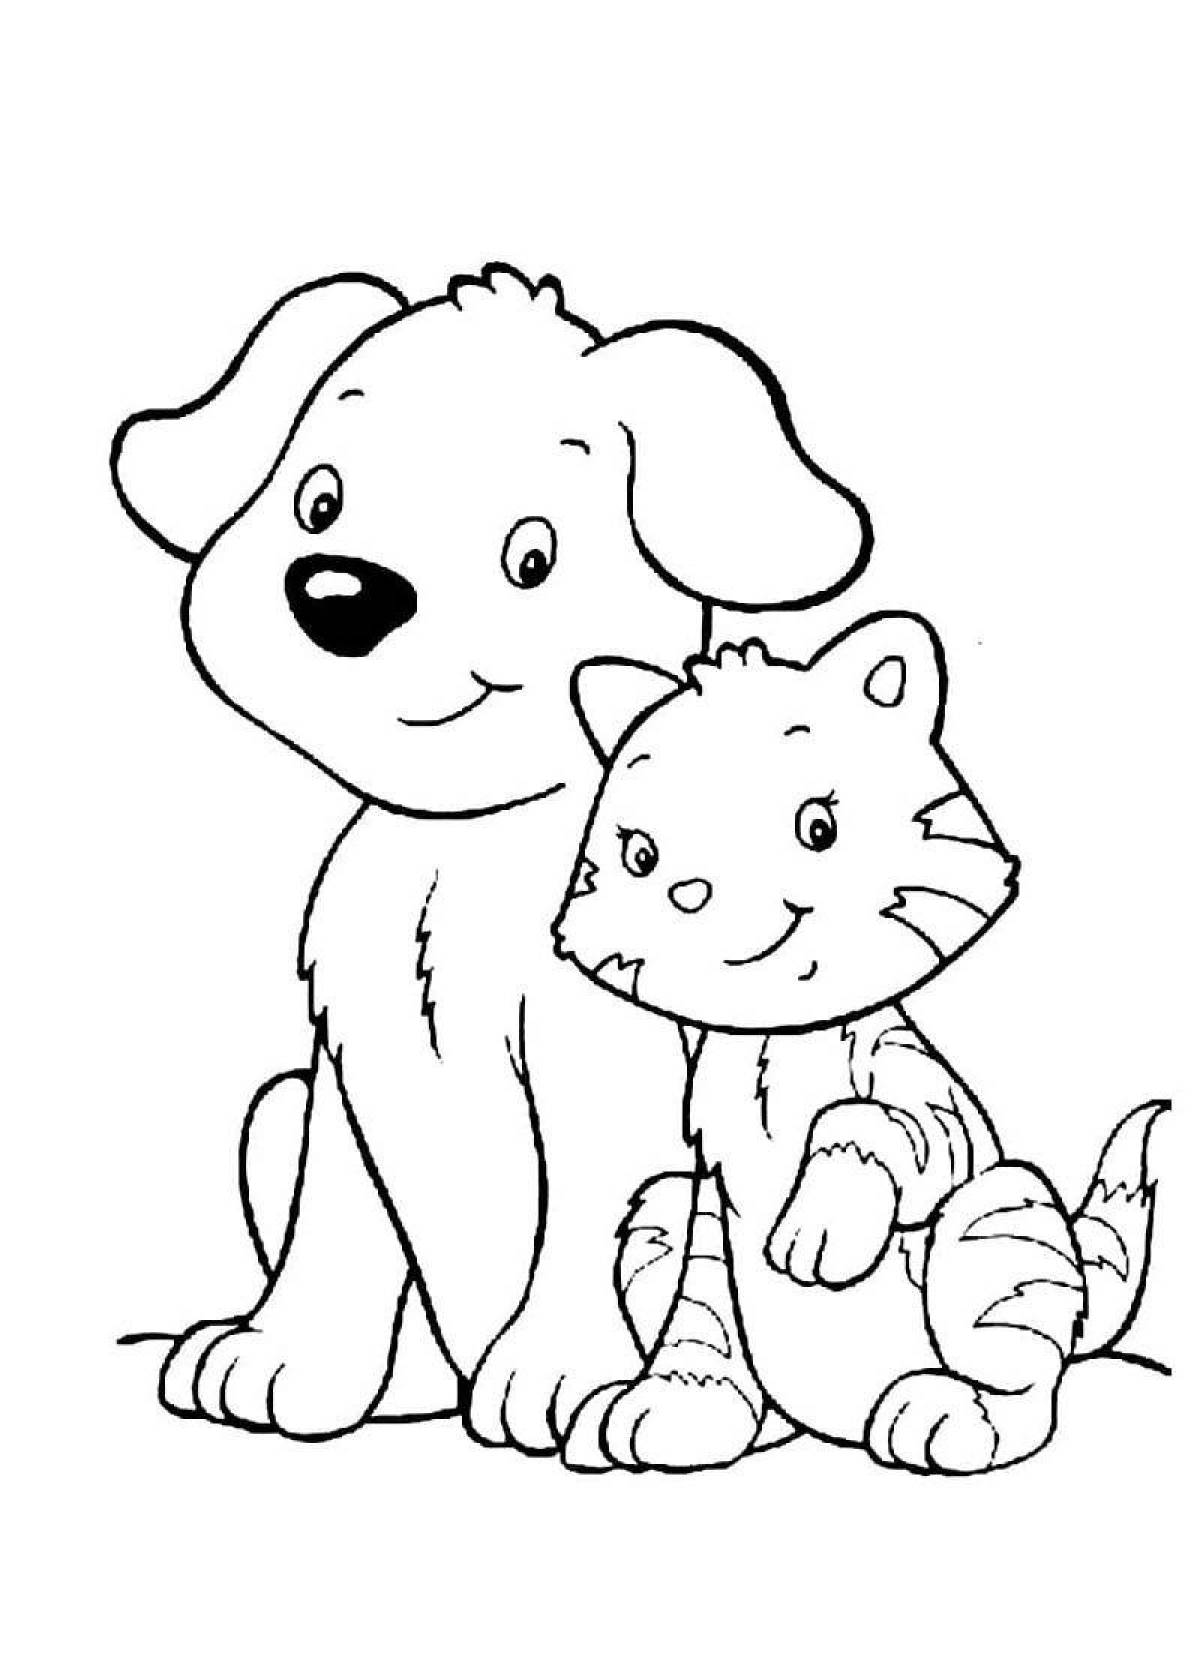 Coloring page playful cat and dog